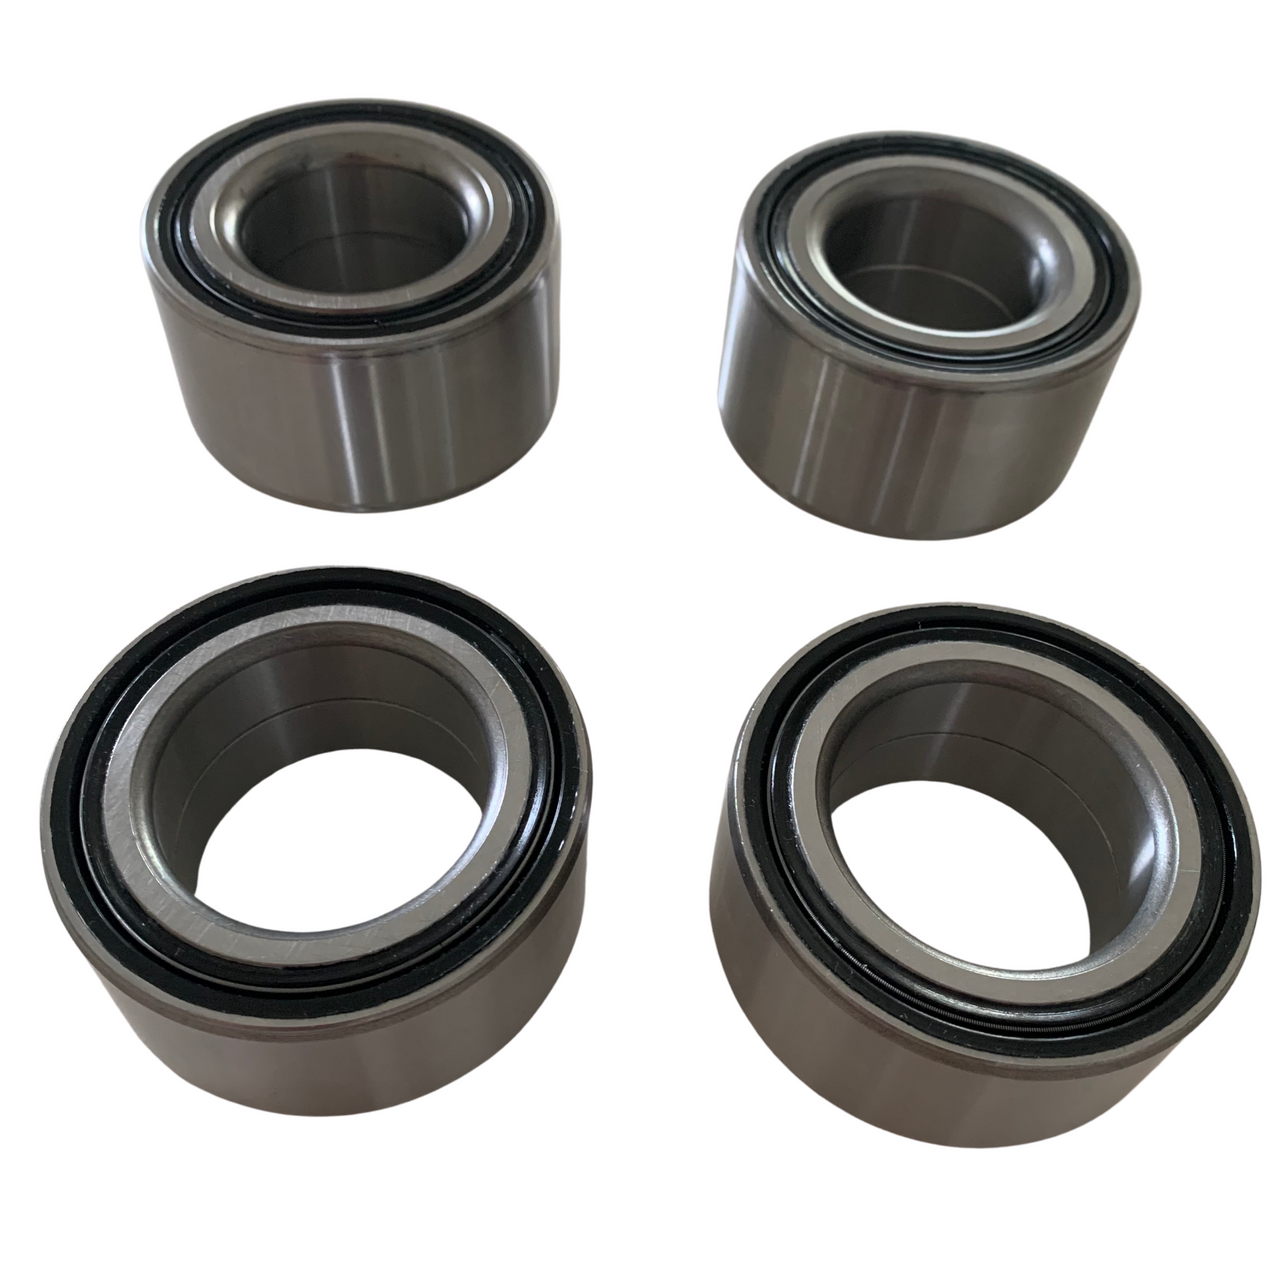 Front And Rear Wheel Bearing For 2010-2014 Polaris RZR 800 RZR 800-s RZR 800-4 FREE FEDEX 2 DAY SHIPPING